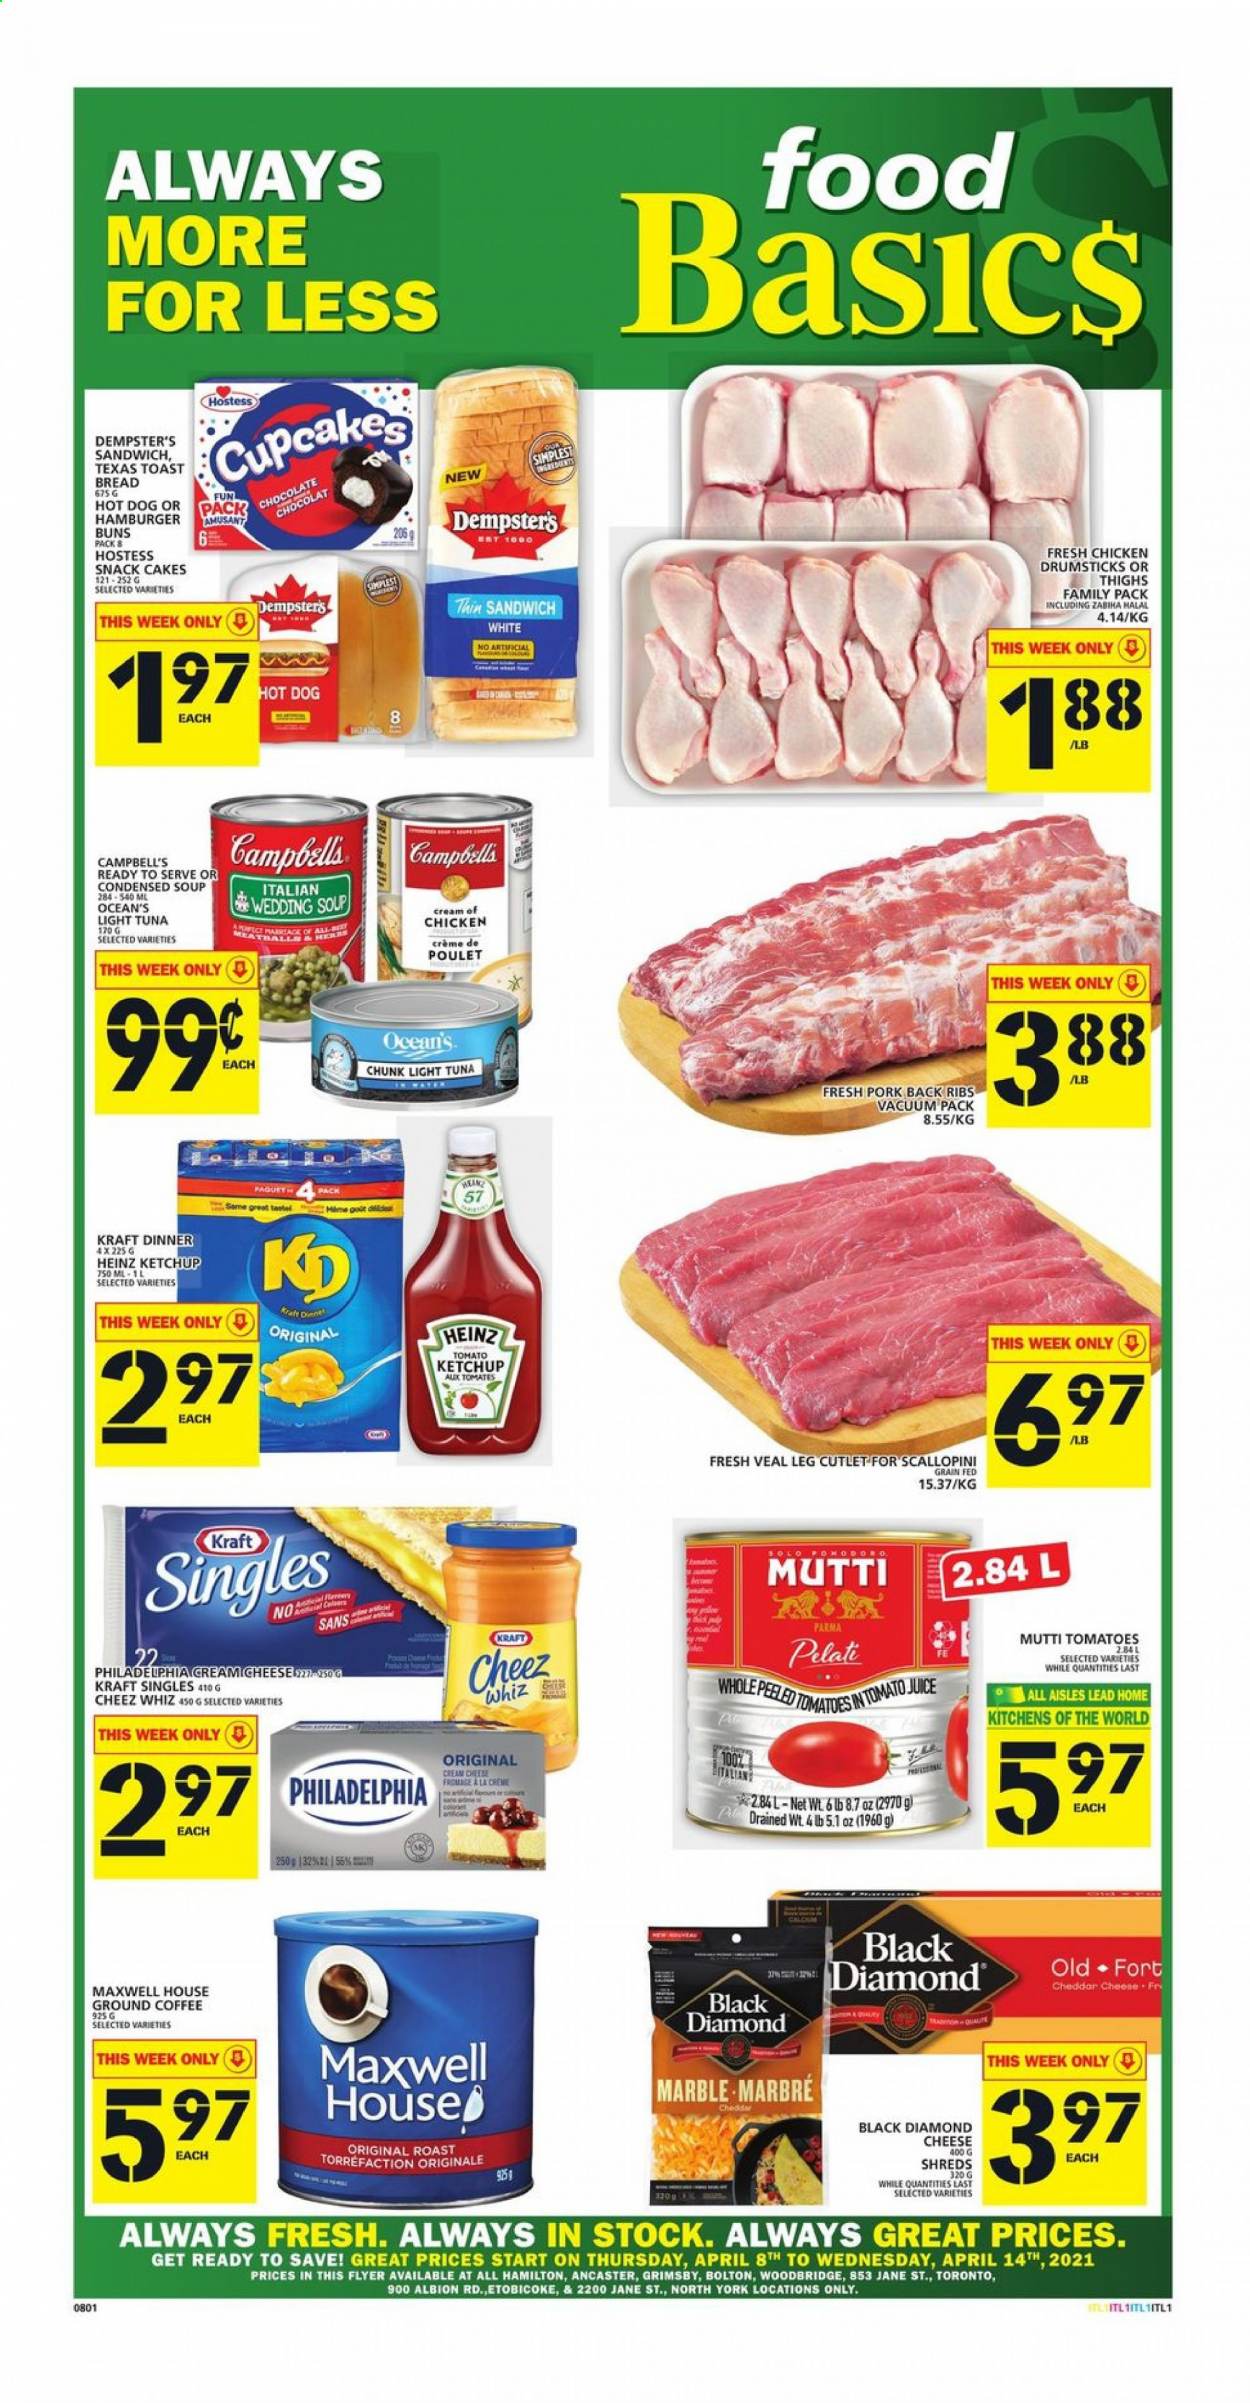 thumbnail - Food Basics Flyer - April 08, 2021 - April 14, 2021 - Sales products - bread, hot dog rolls, buns, burger buns, toast bread, cupcake, tuna, Campbell's, sandwich, condensed soup, Kraft®, ready meal, cheese spread, cream cheese, sandwich slices, cheddar, cheese, Kraft Singles, chocolate, snack cake, canned tuna, light tuna, canned fish, peeled tomatoes, ketchup, tomato juice, vegetable juice, Maxwell House, coffee, ground coffee, Woodbridge, chicken thighs, chicken drumsticks, chicken, veal cutlet, veal meat, ribs, pork meat, pork ribs, pork back ribs, Heinz, Philadelphia. Page 1.